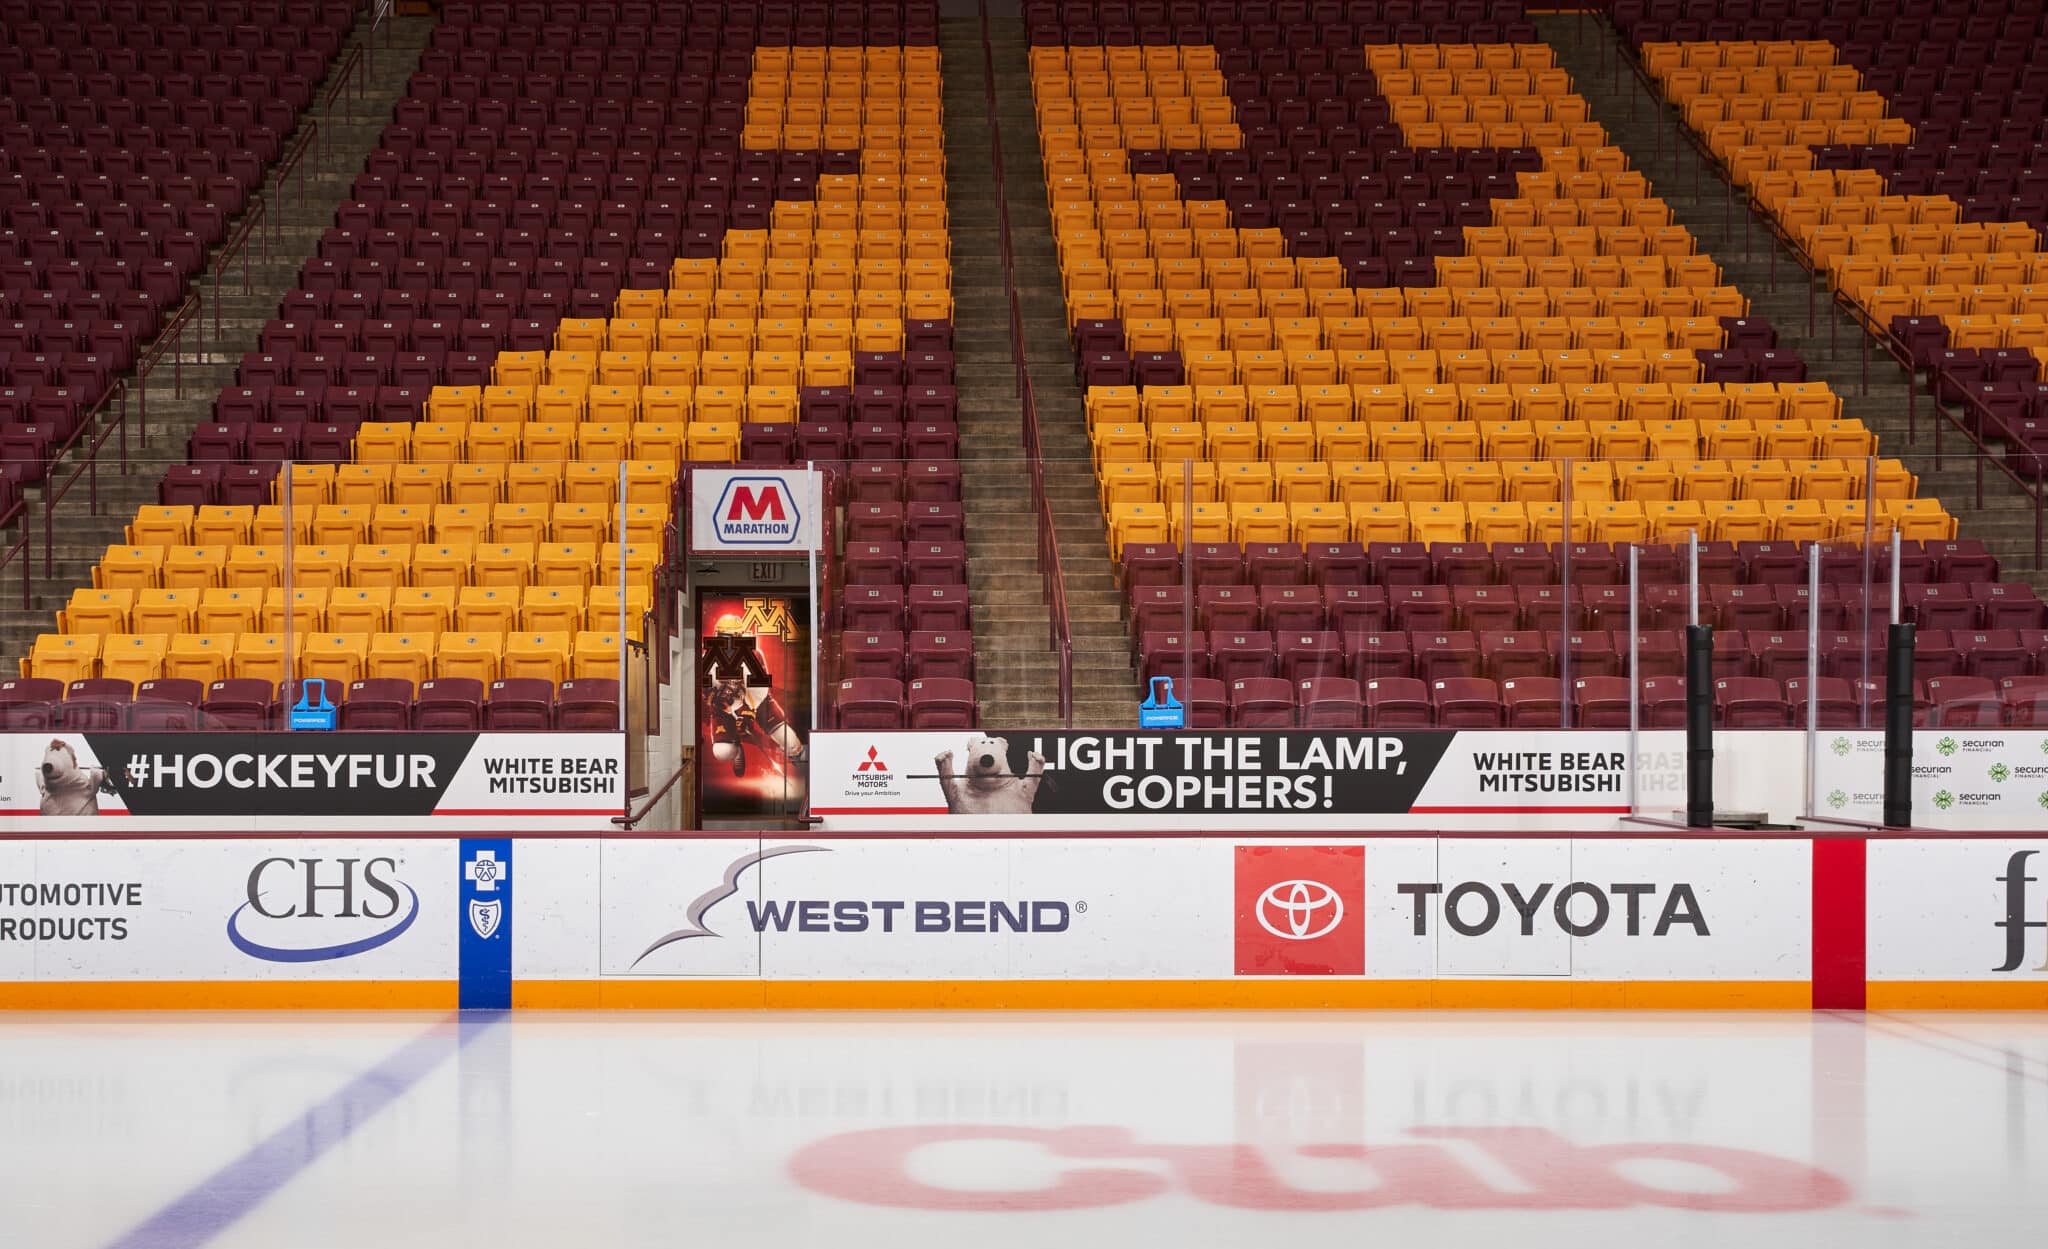 JLG worked with the University of Minnesota to shrink the rink at 3M Arena at Mariucci from an Olympic size sheet to an NHL-hybrid size.